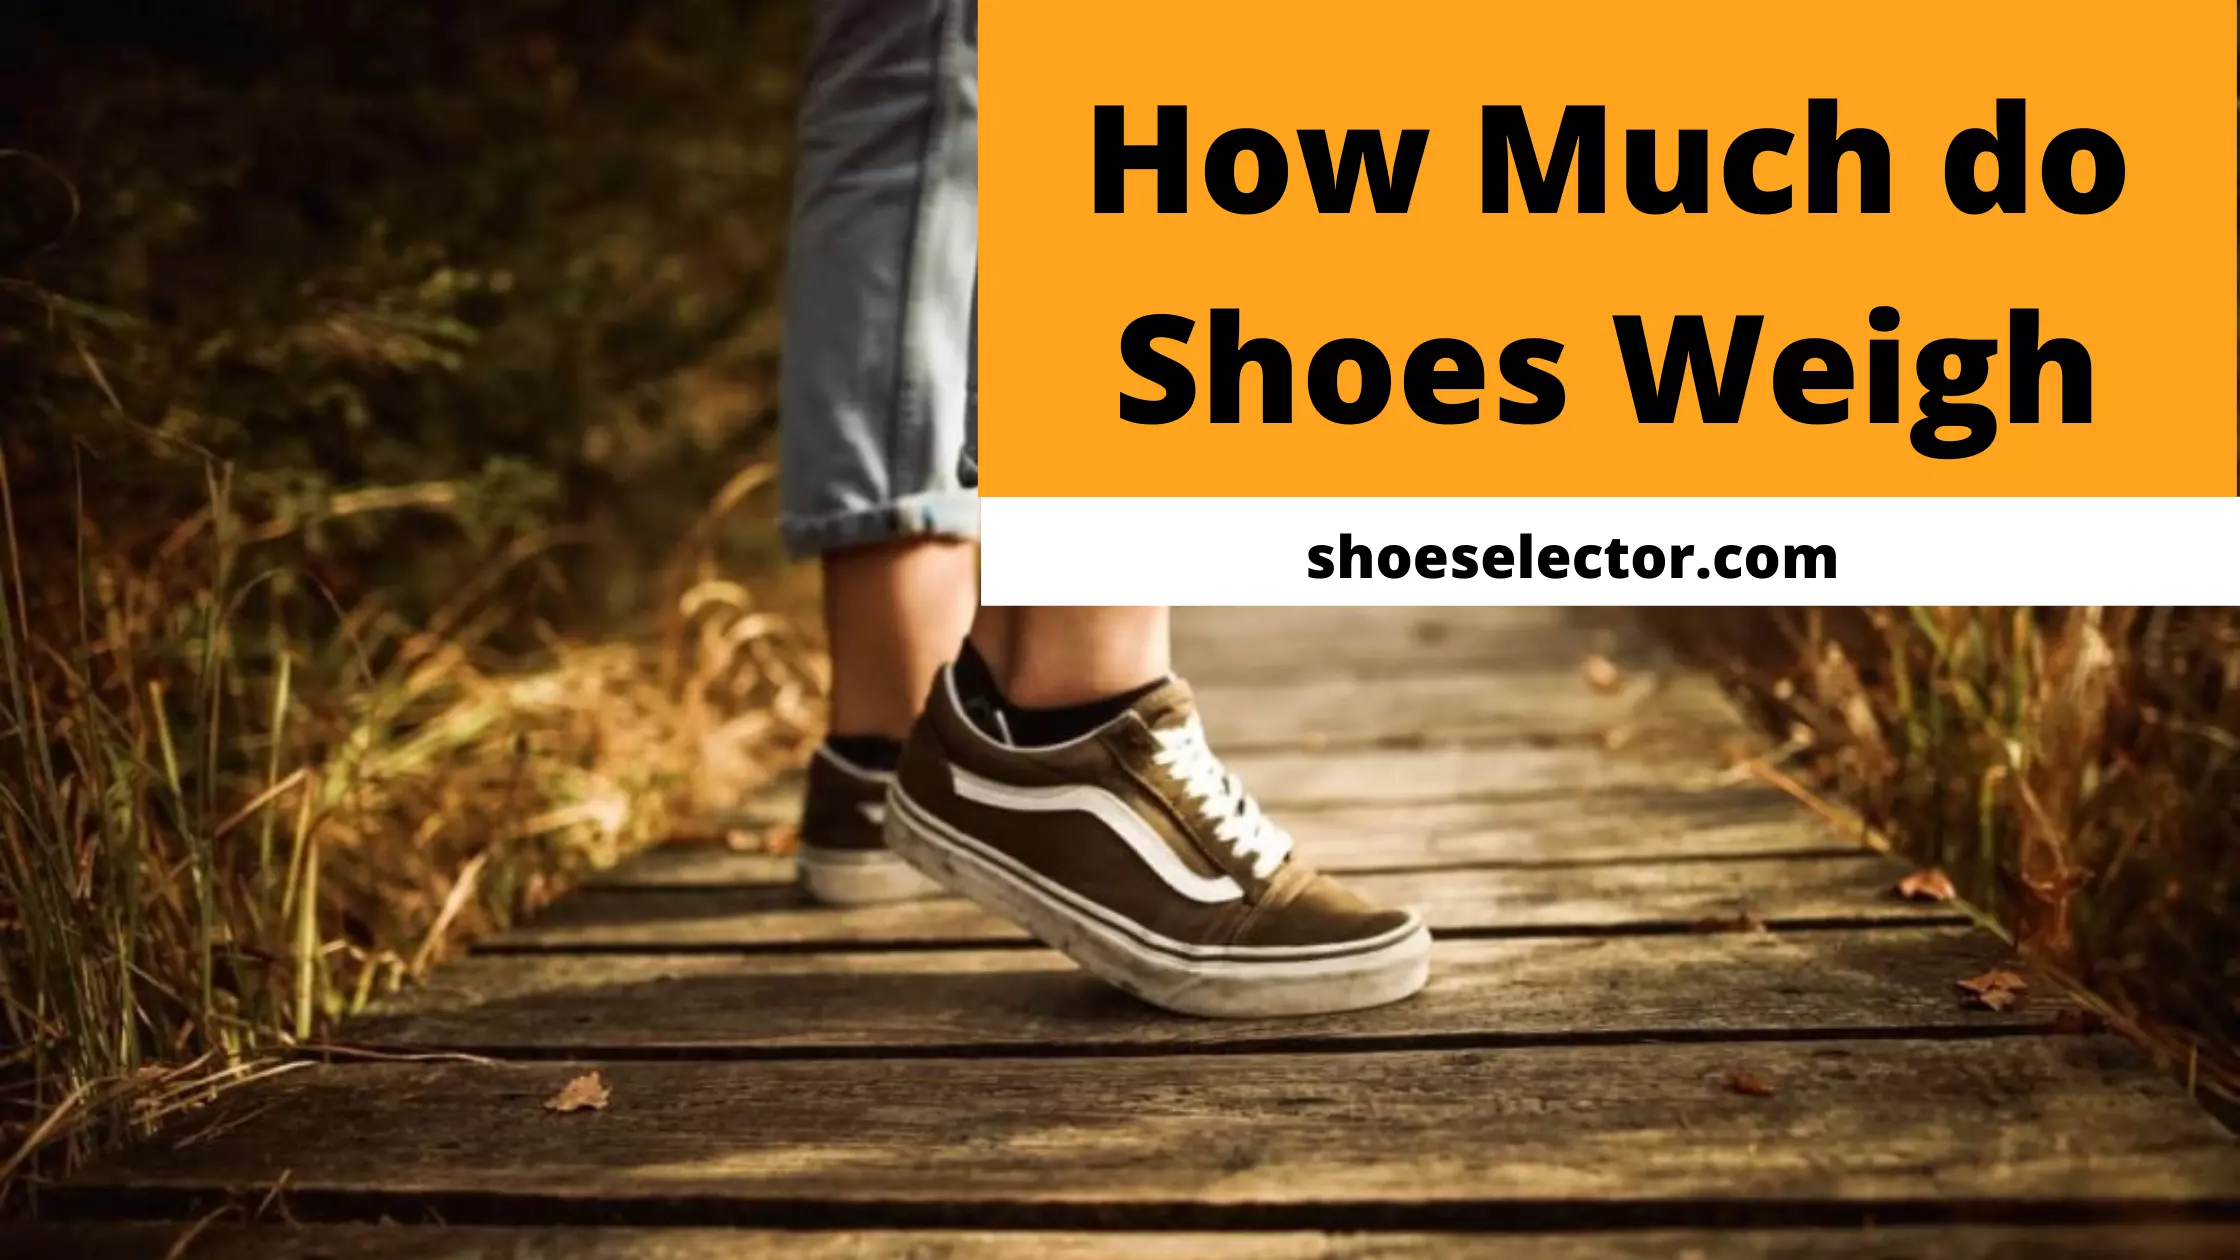 How Much Do Shoes Weigh? - Recommended Guide